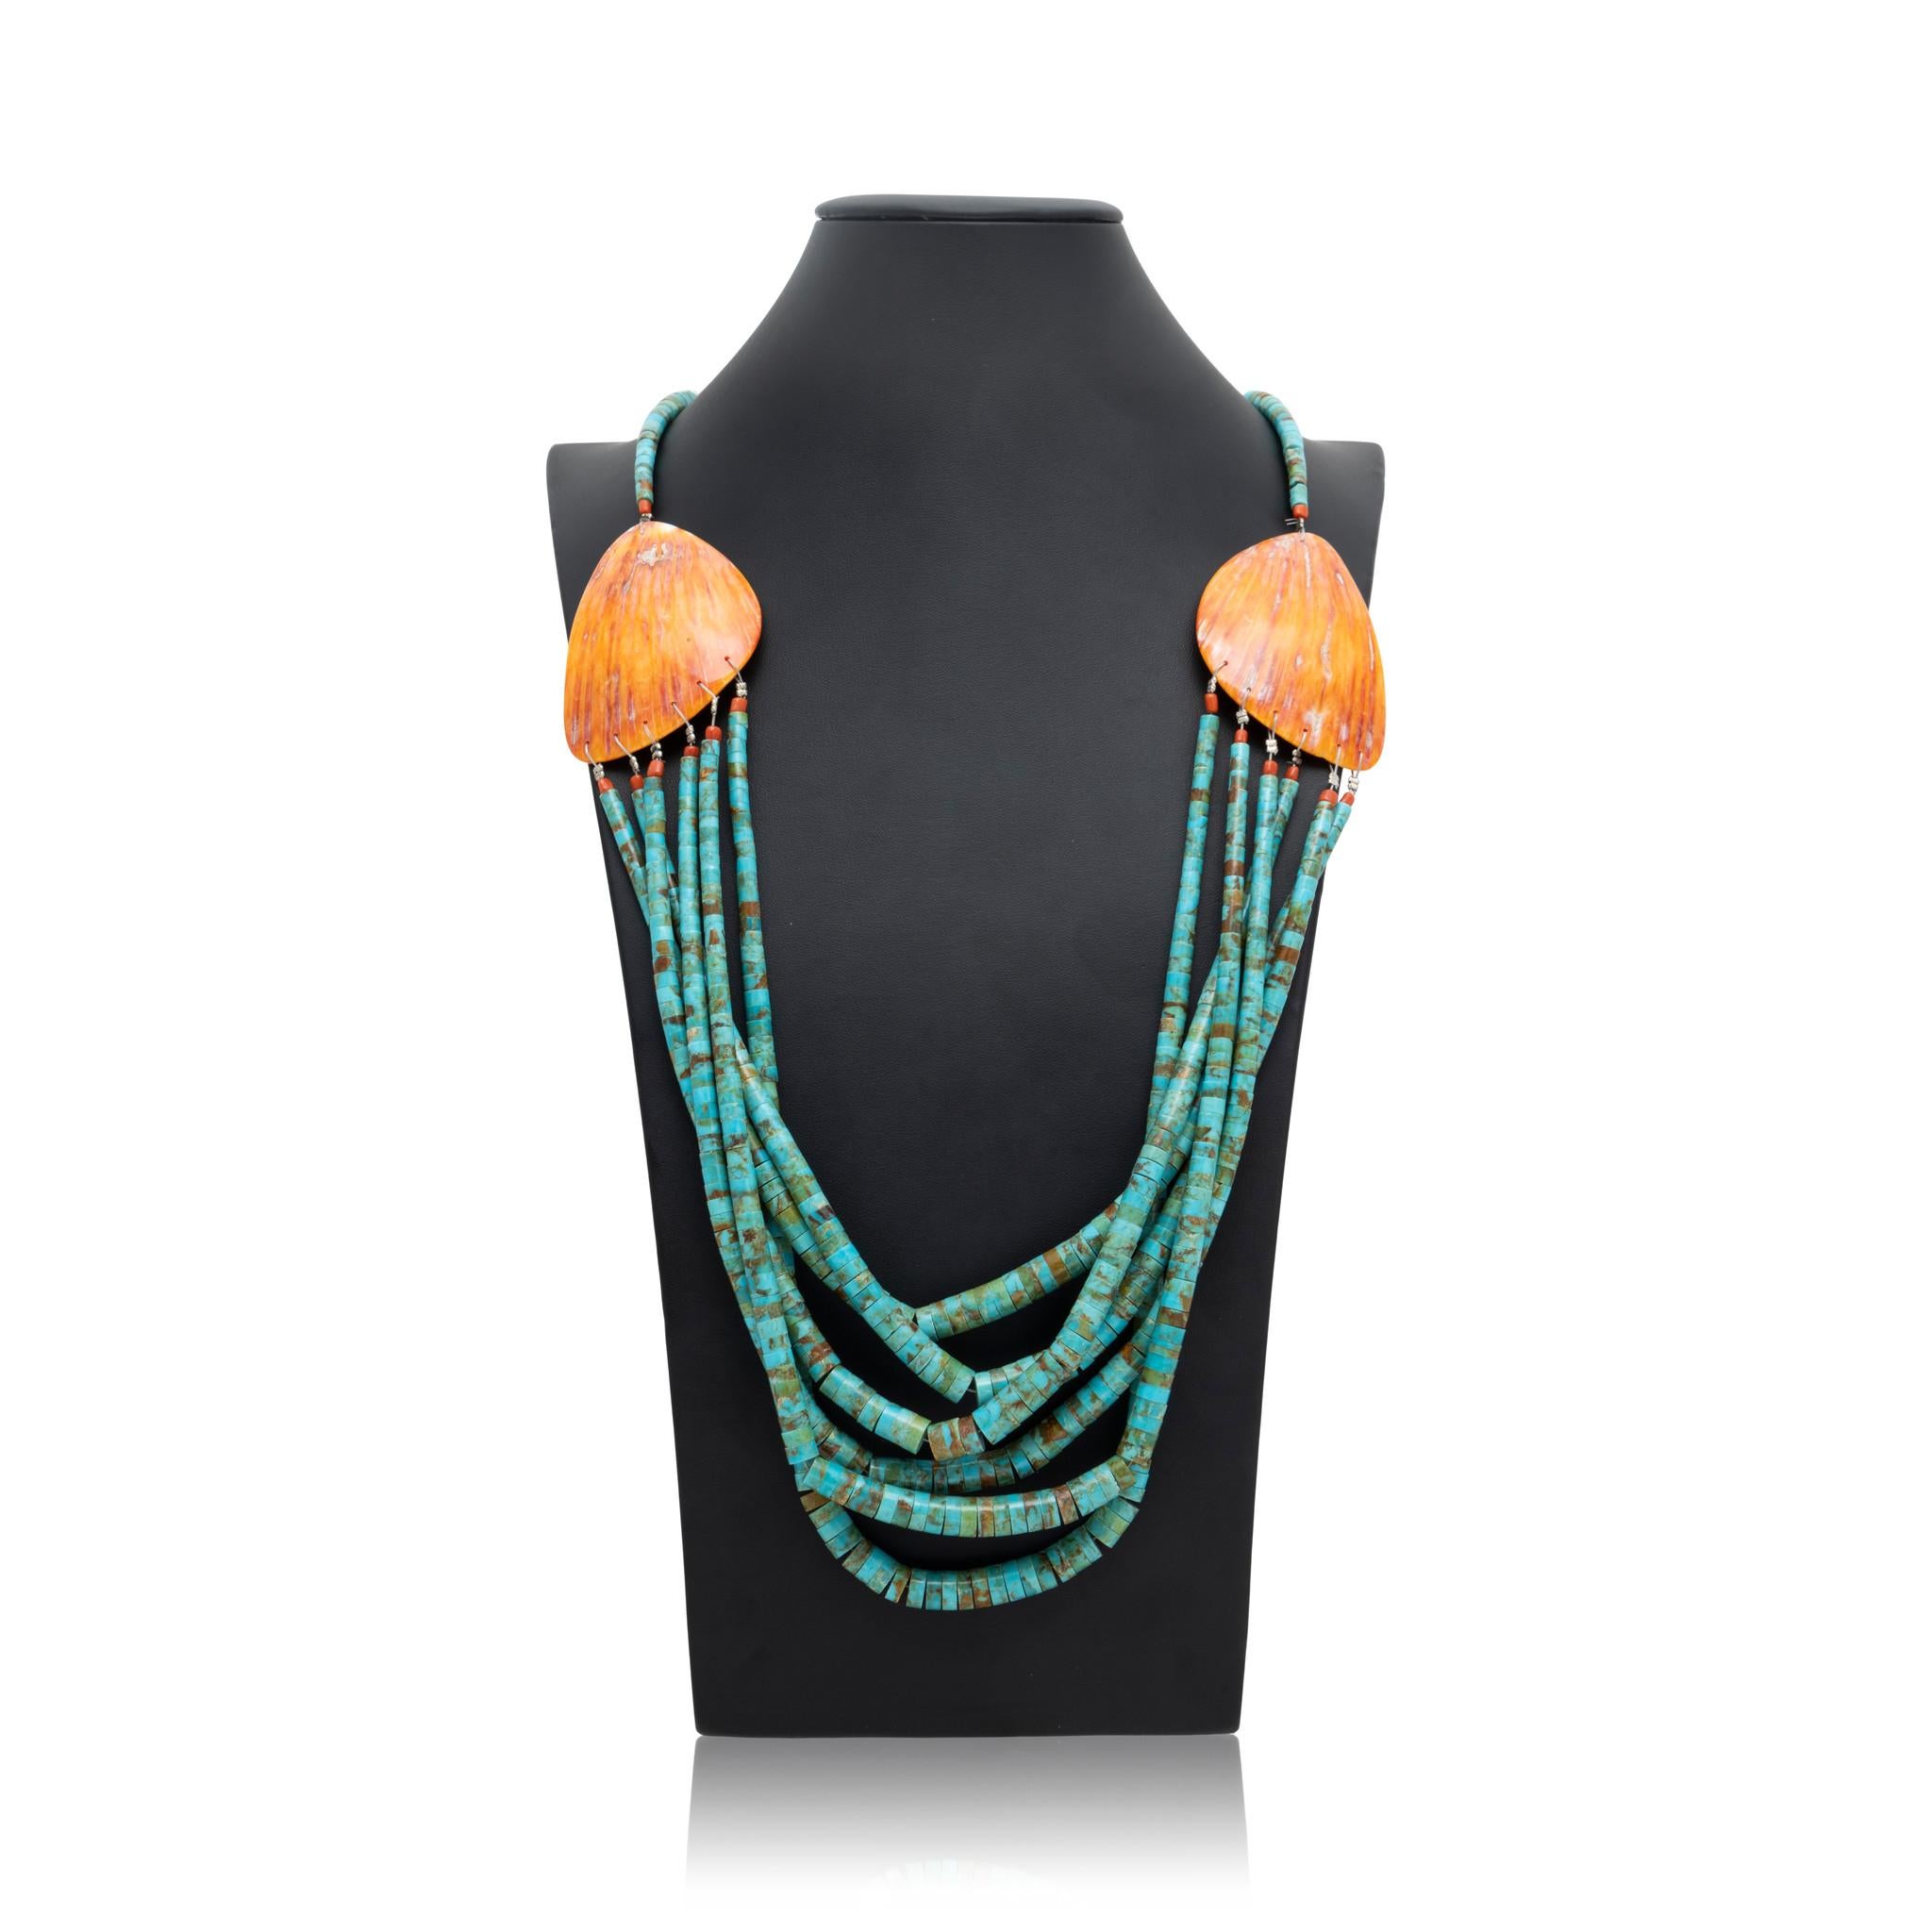 Santo Domingo spiny oyster and natural Kingman turquoise Heishi necklace. Having five strands with coral beaded ends and graduated stones, sterling silver ties and two large spiny oyster shells near center. Multi-strand lower half attaches to